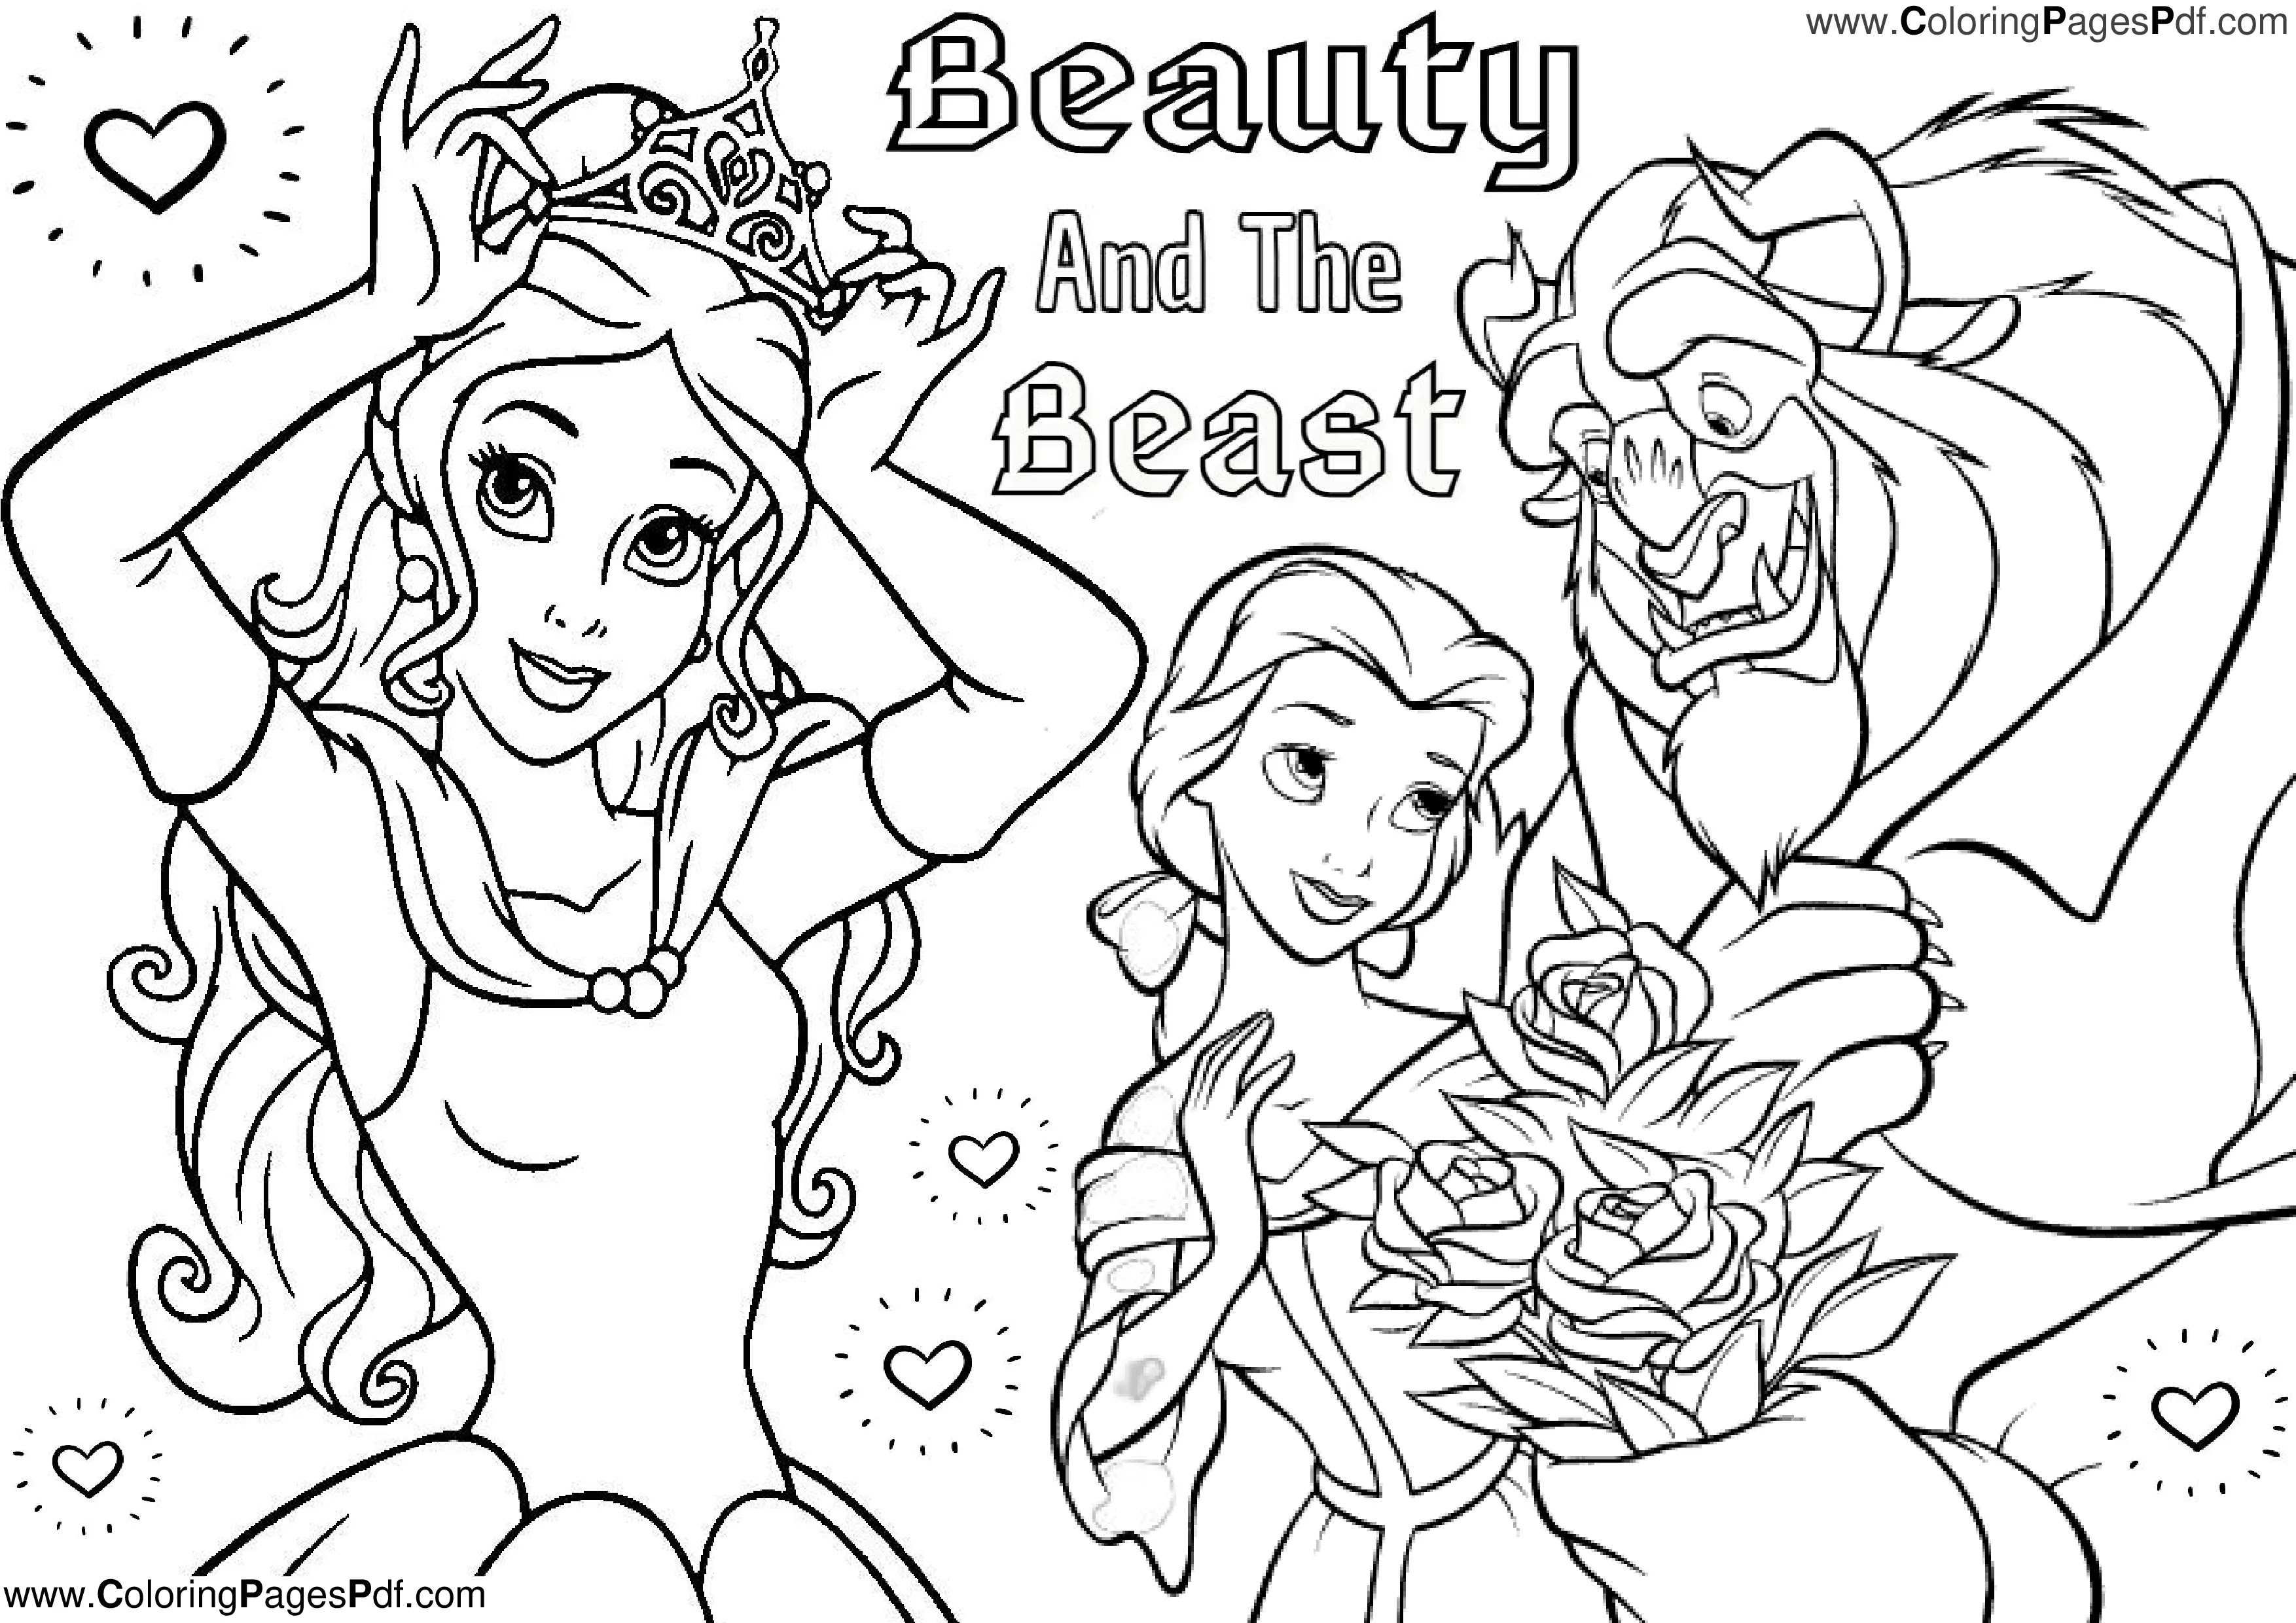 Cute Beauty and the beast coloring pages